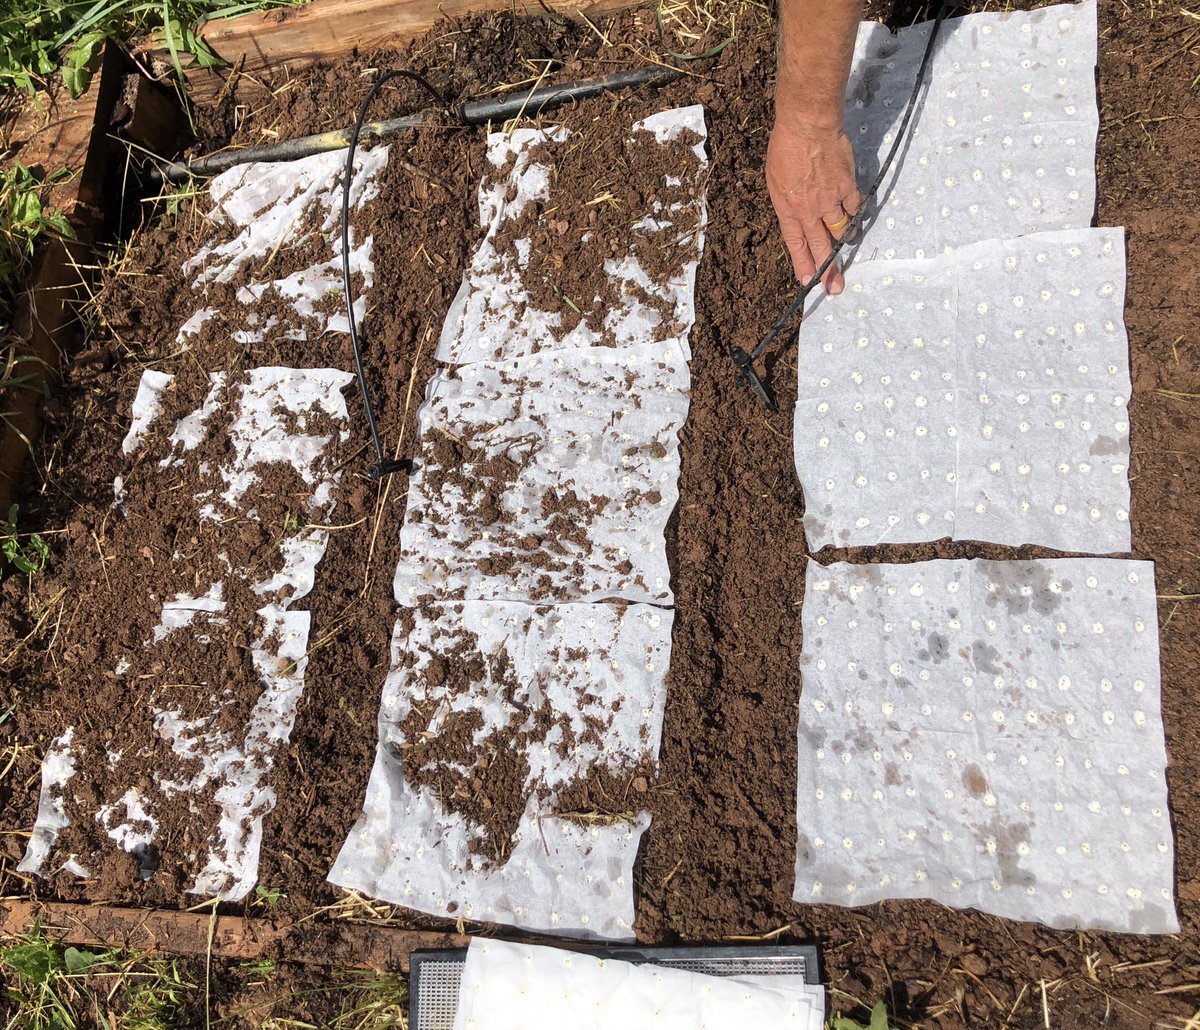 We planted the last of the main garden crops until fall today. I make DIY seed mats for carrot seeds. I hate thinning carrots. These are properly spaced at planting. 70-80 carrots per mat.  Seeds tacked down with flour/water paste.  #VictoryGarden